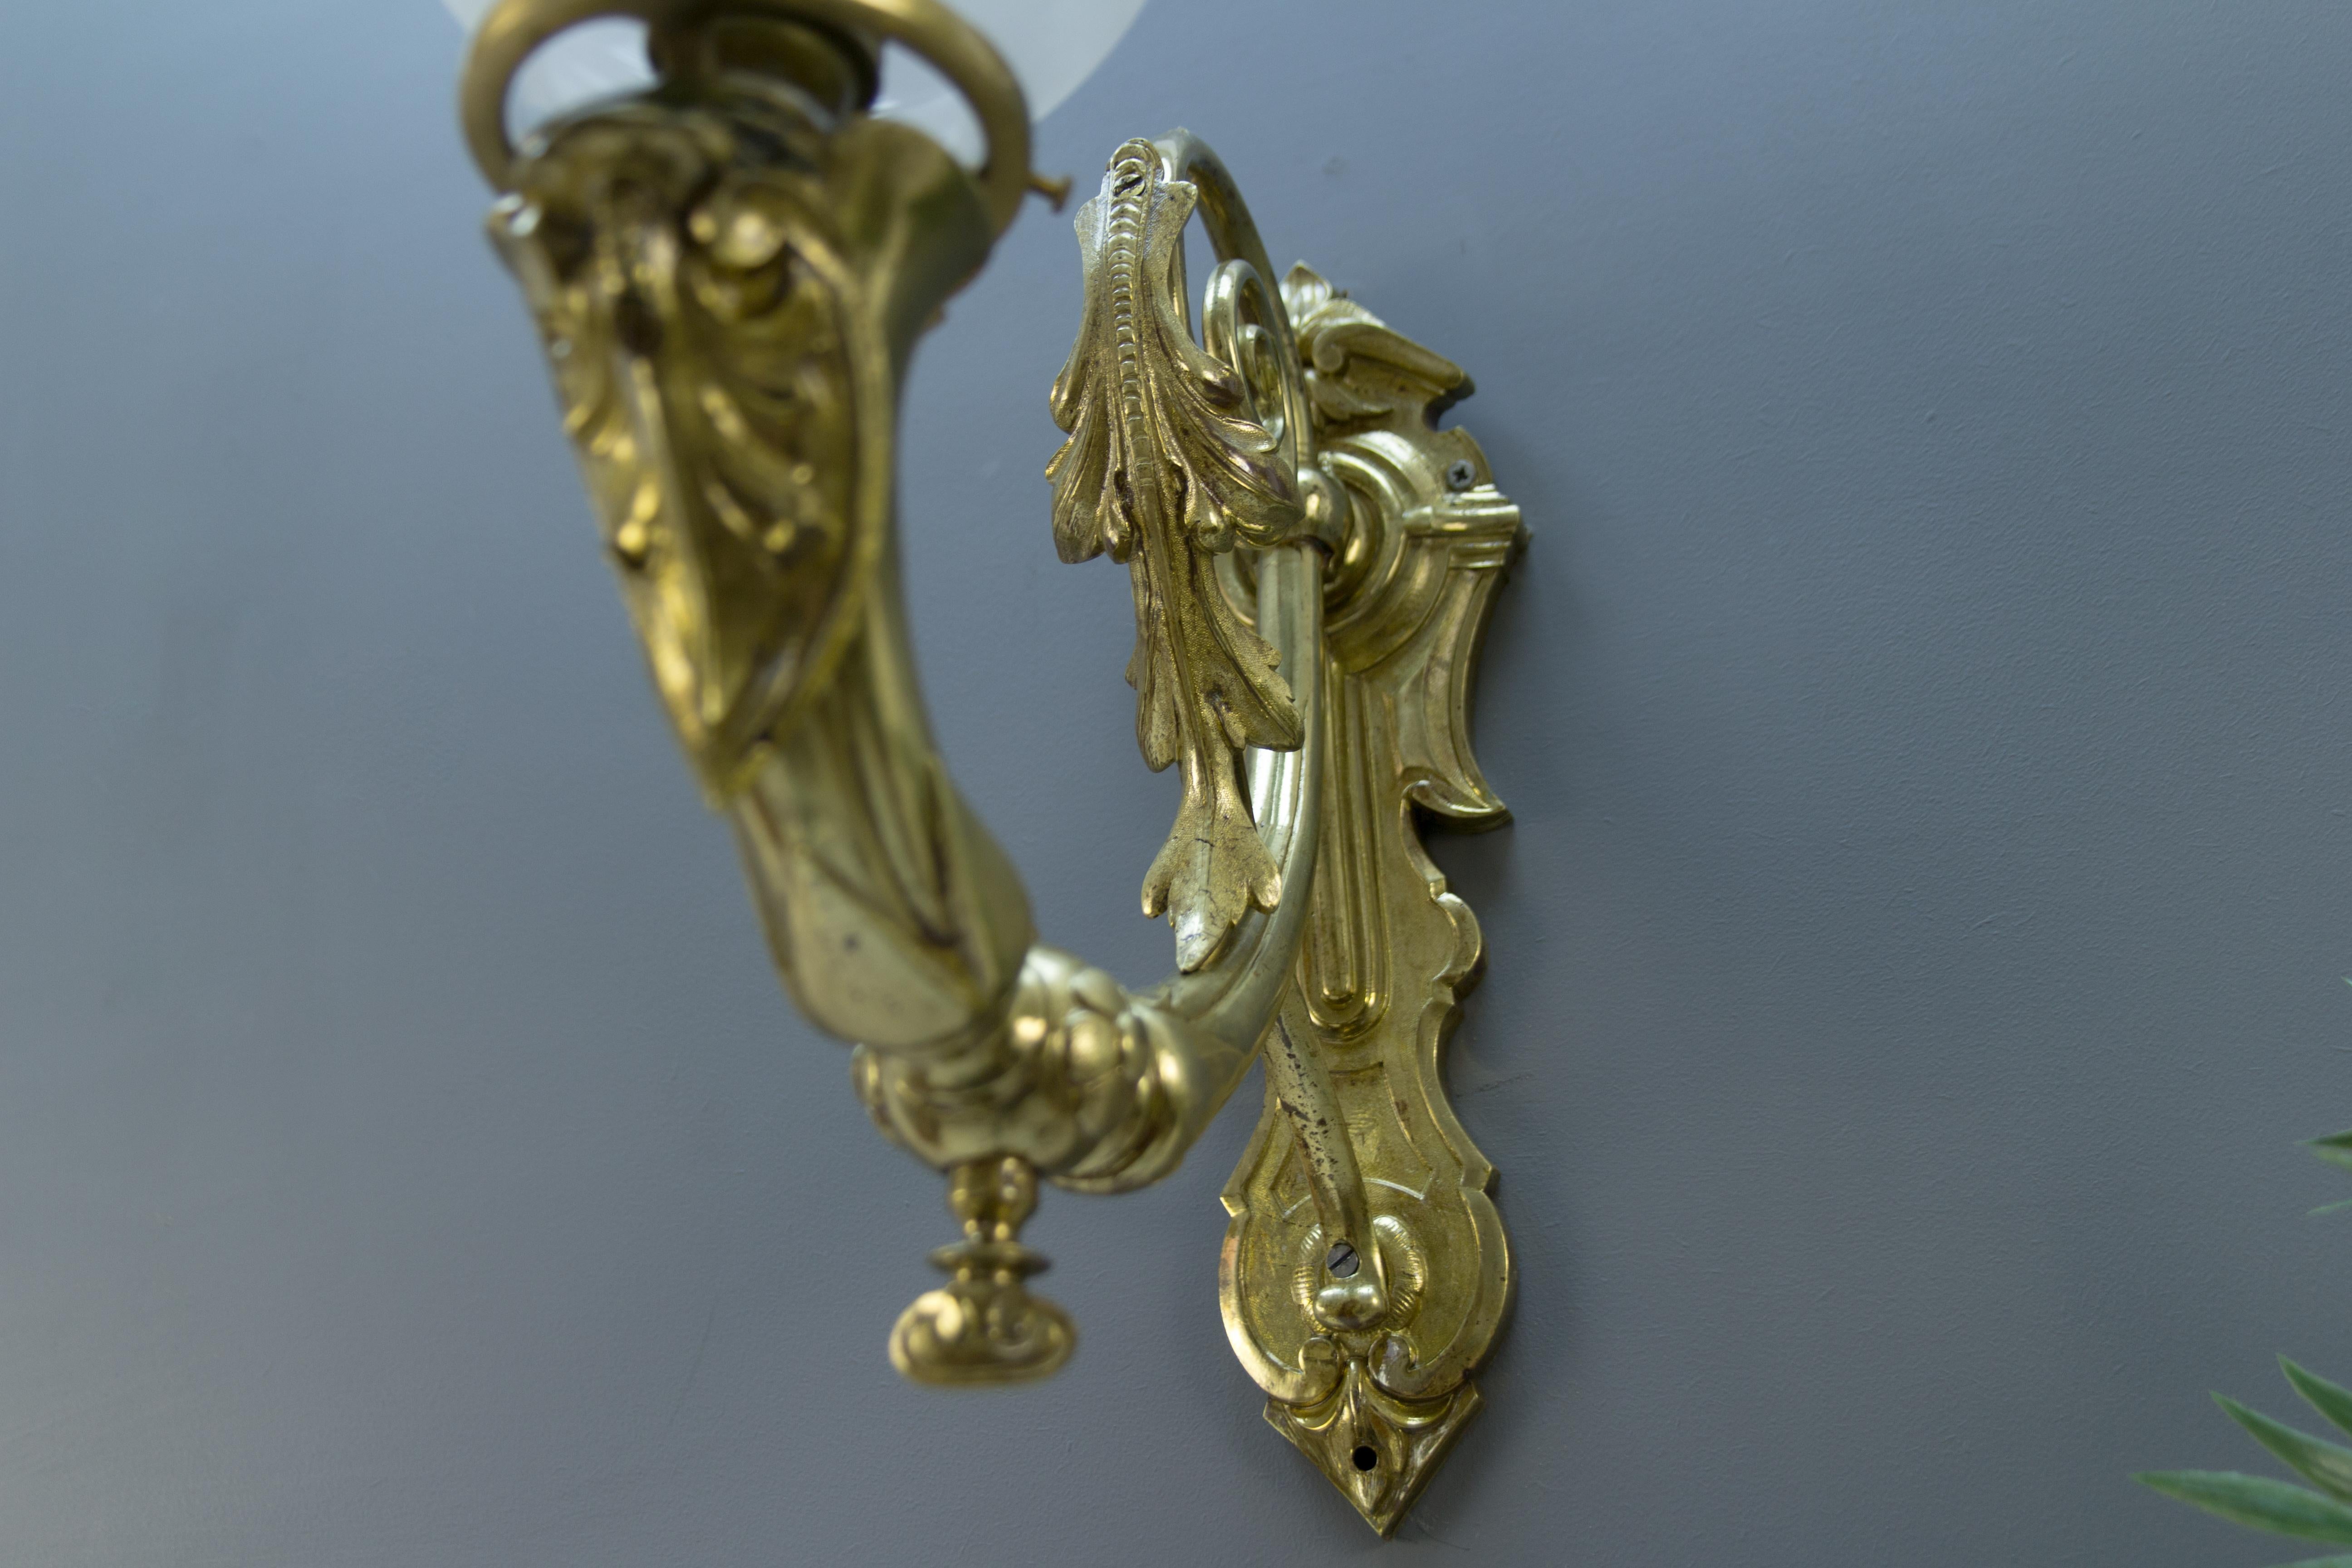 Frosted Late 19th Century French Electrified Gas Wall Light Sconce